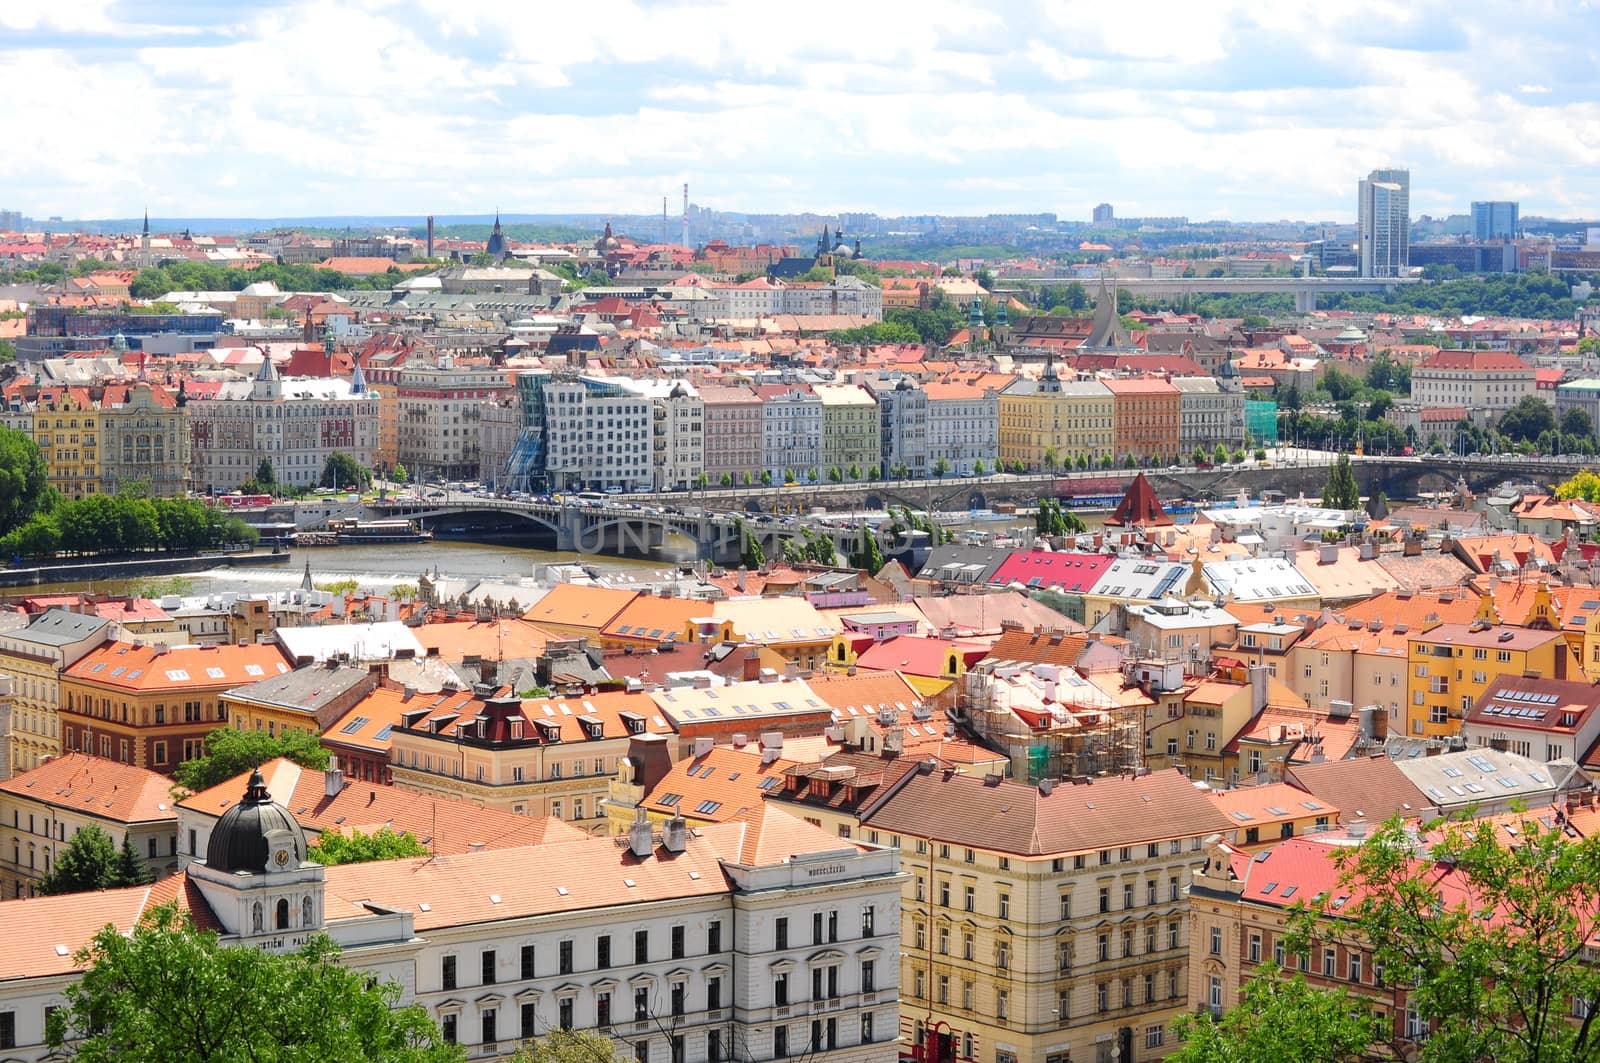 Panoramic view of Prague from the Petrin Hill on a sunny day